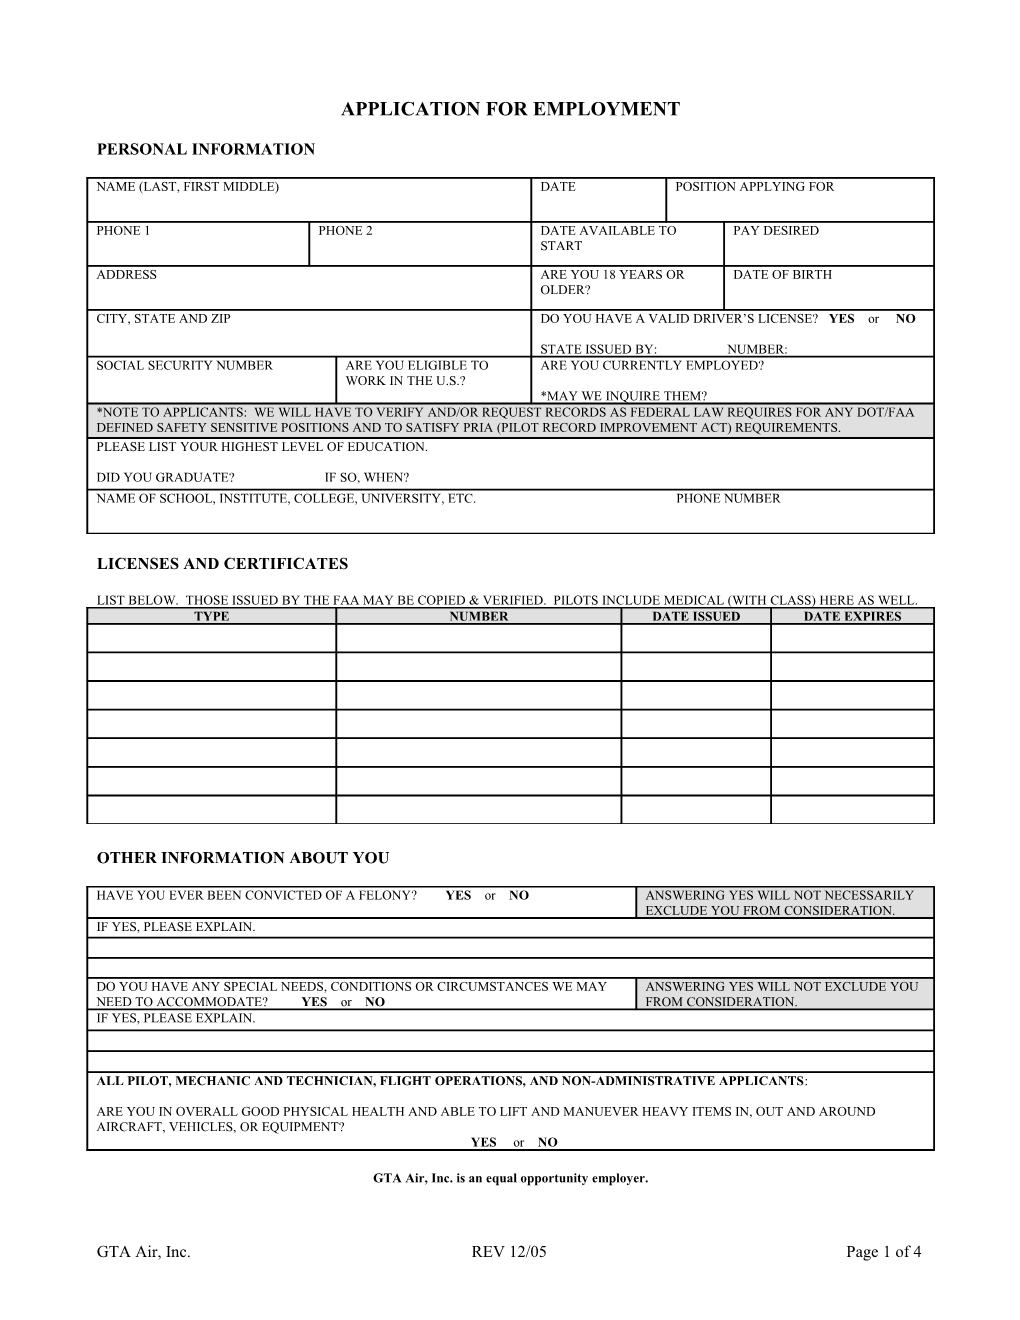 Application for Employment s89